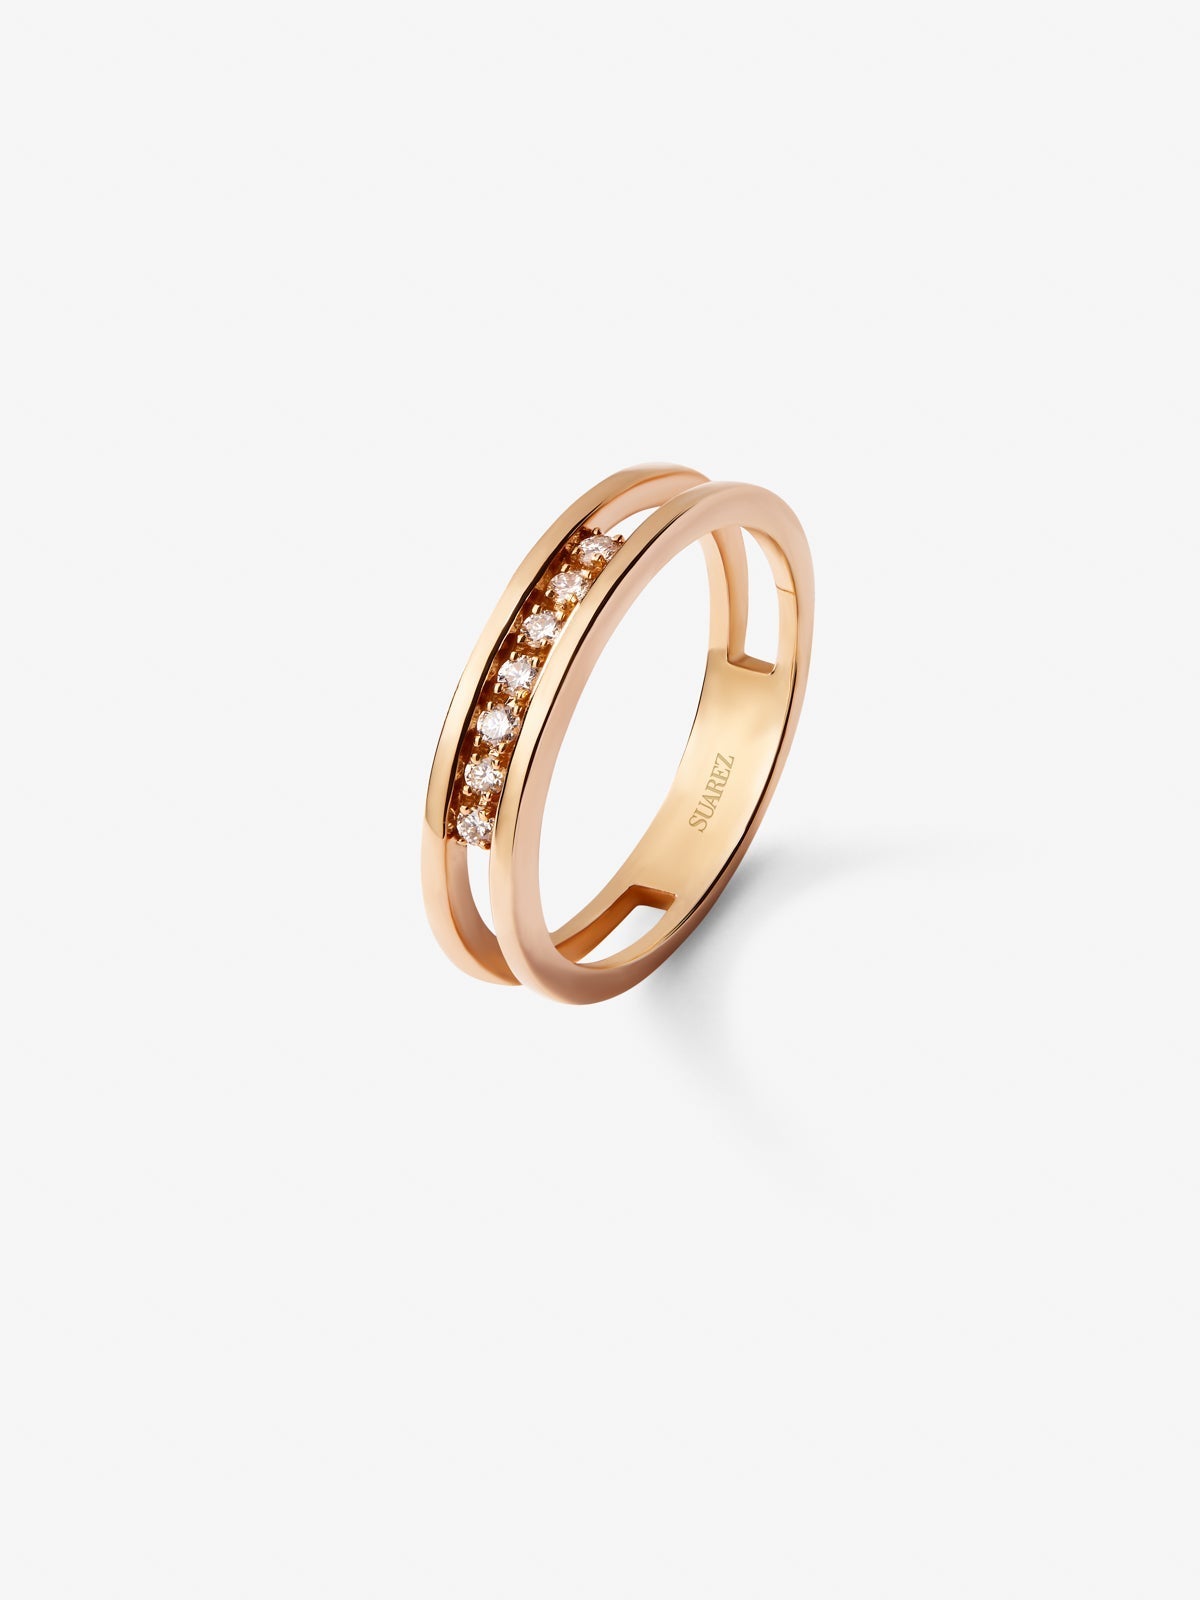 18K rose gold double ring with 7 brilliant-cut diamonds with a total of 0.1 cts